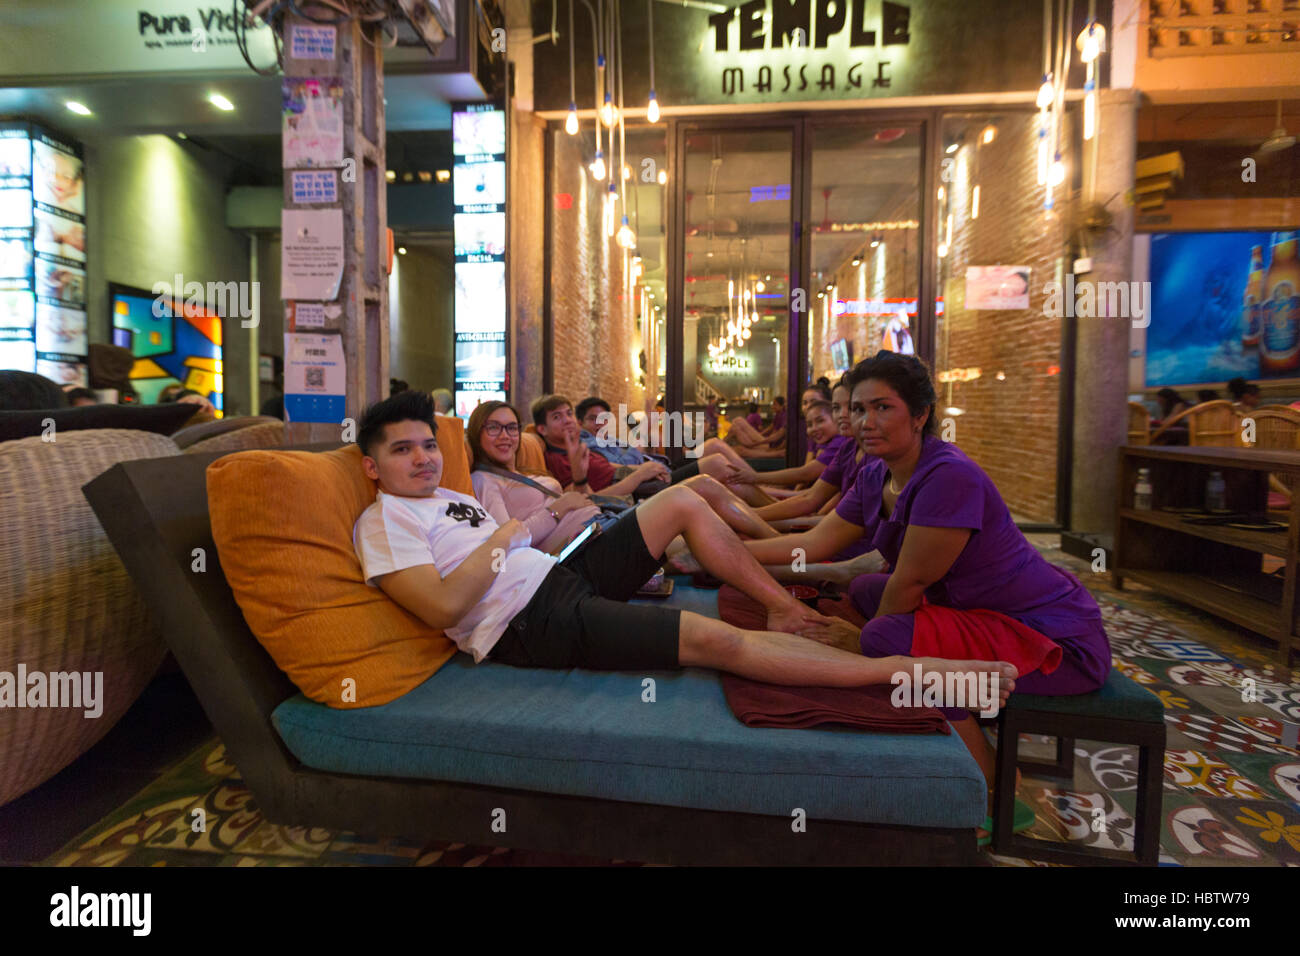 People having outdoor massage in Siem Reap at night. Cambodia Stock Photo